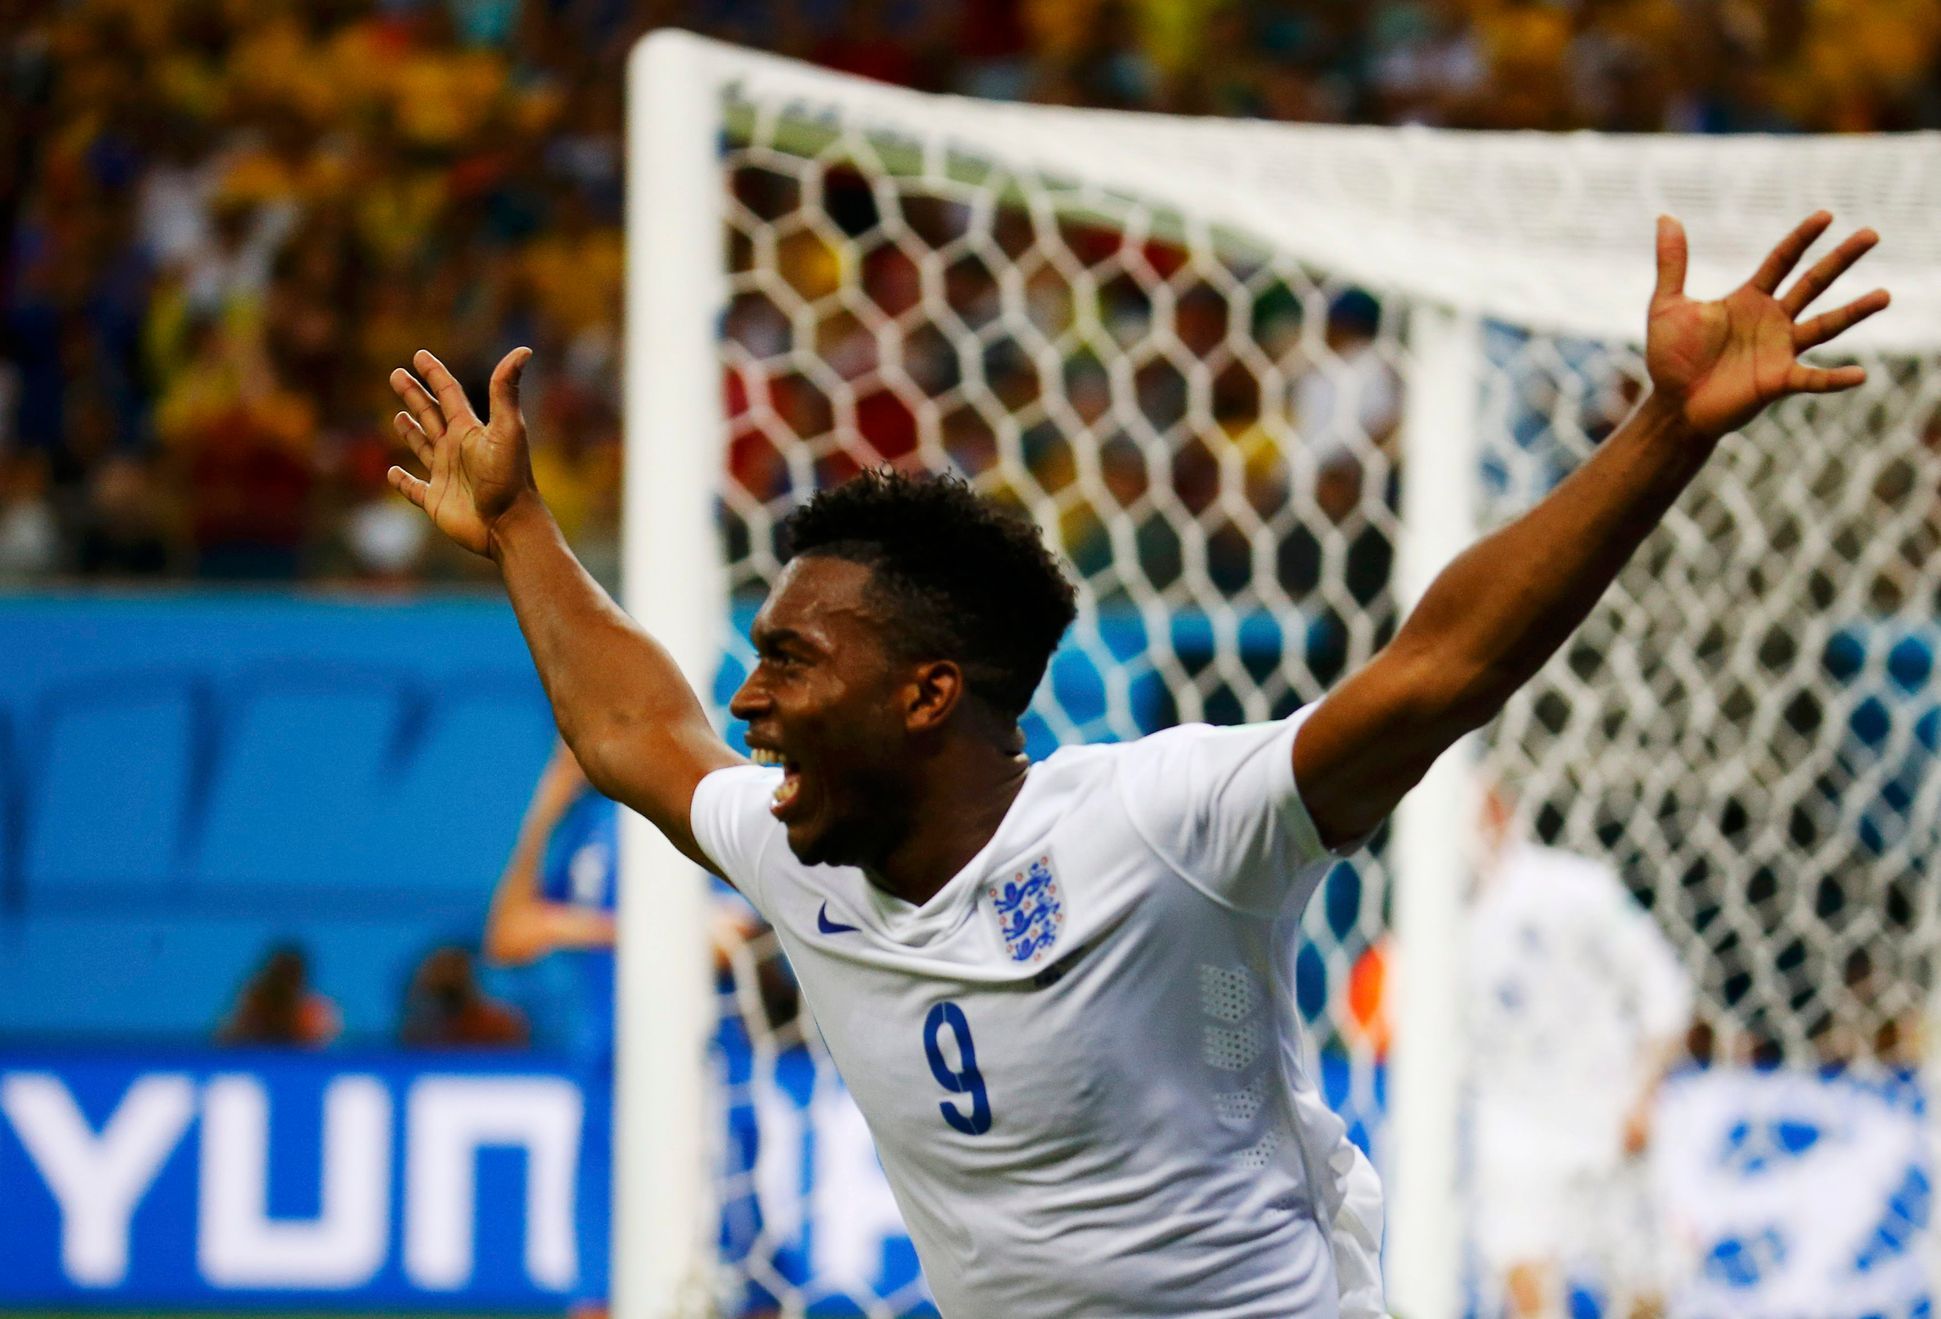 England's Sturridge celebrates his goal against Italy during their 2014 World Cup Group D soccer match at the Amazonia arena in Manaus